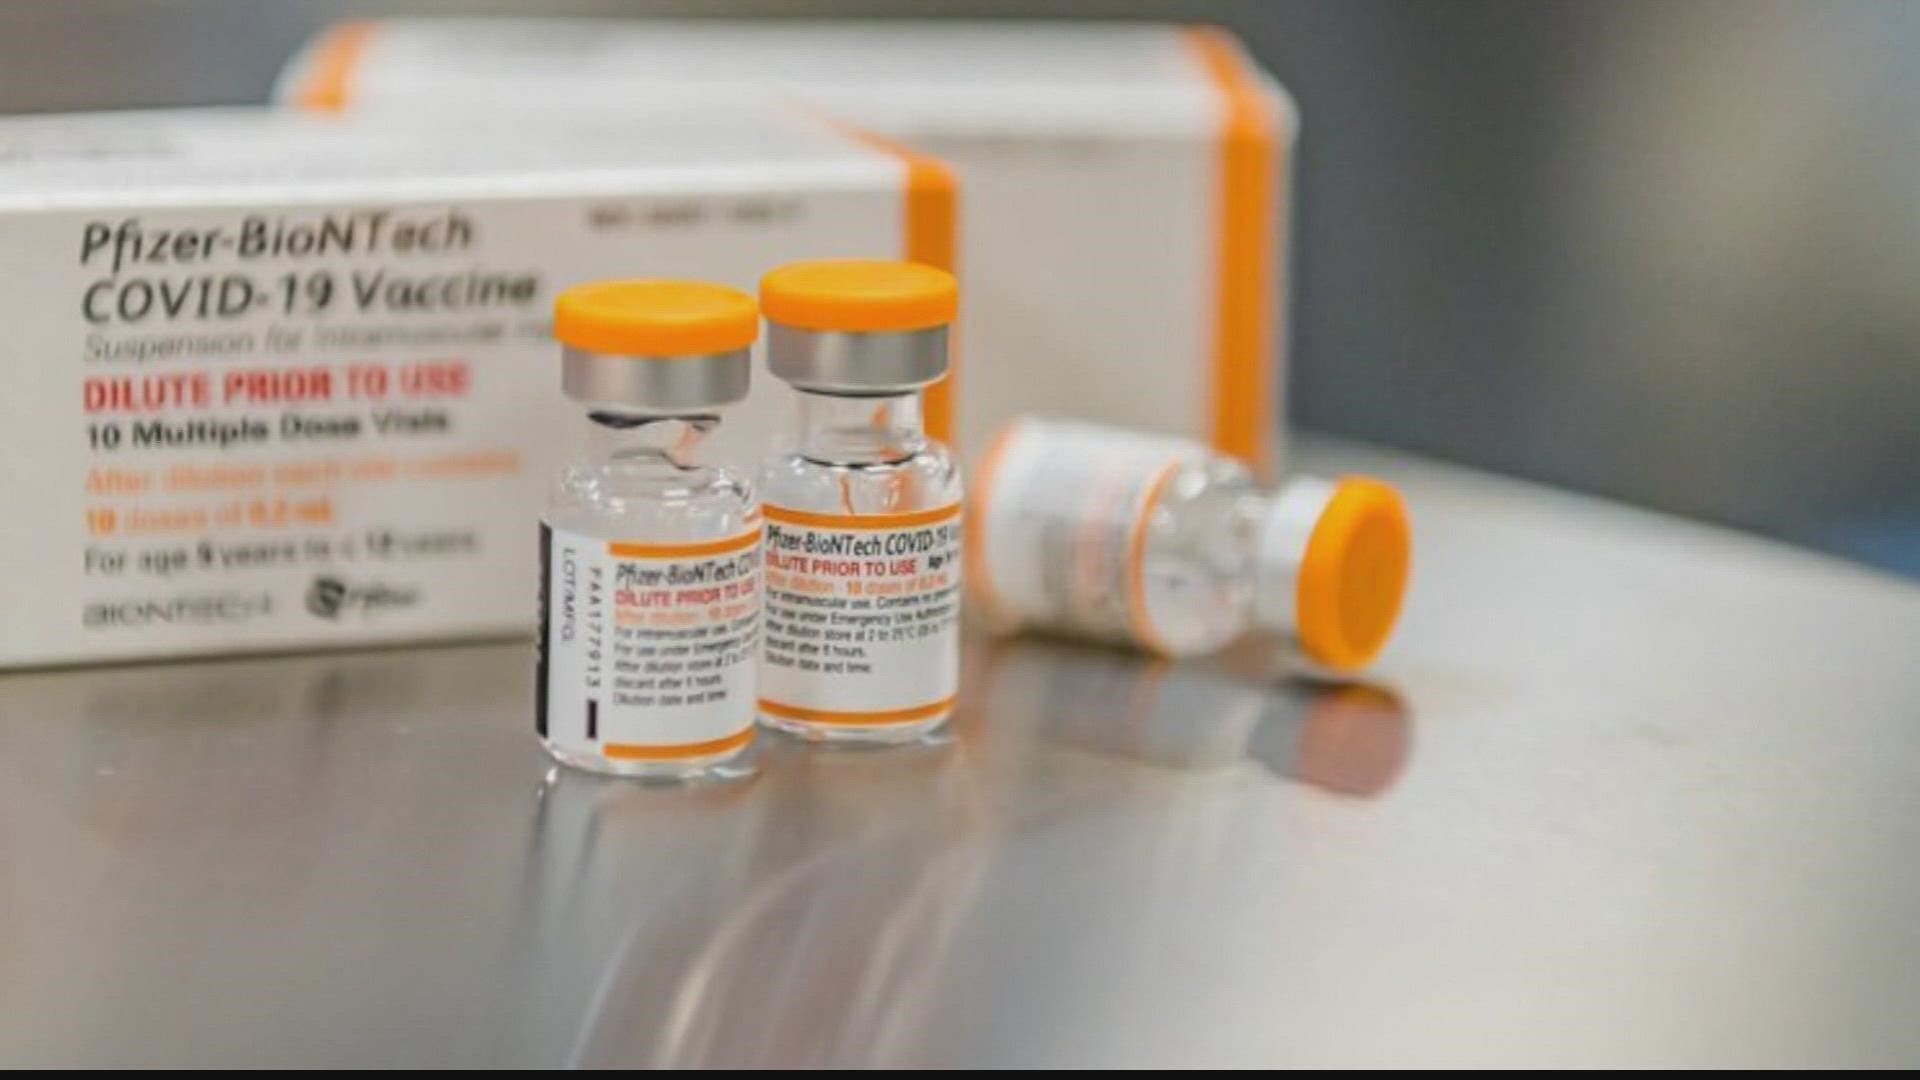 Kids will be able to get the Pfizer booster 5 months after their initial pair of shots under the amended emergency use authorization approves by the FDA.